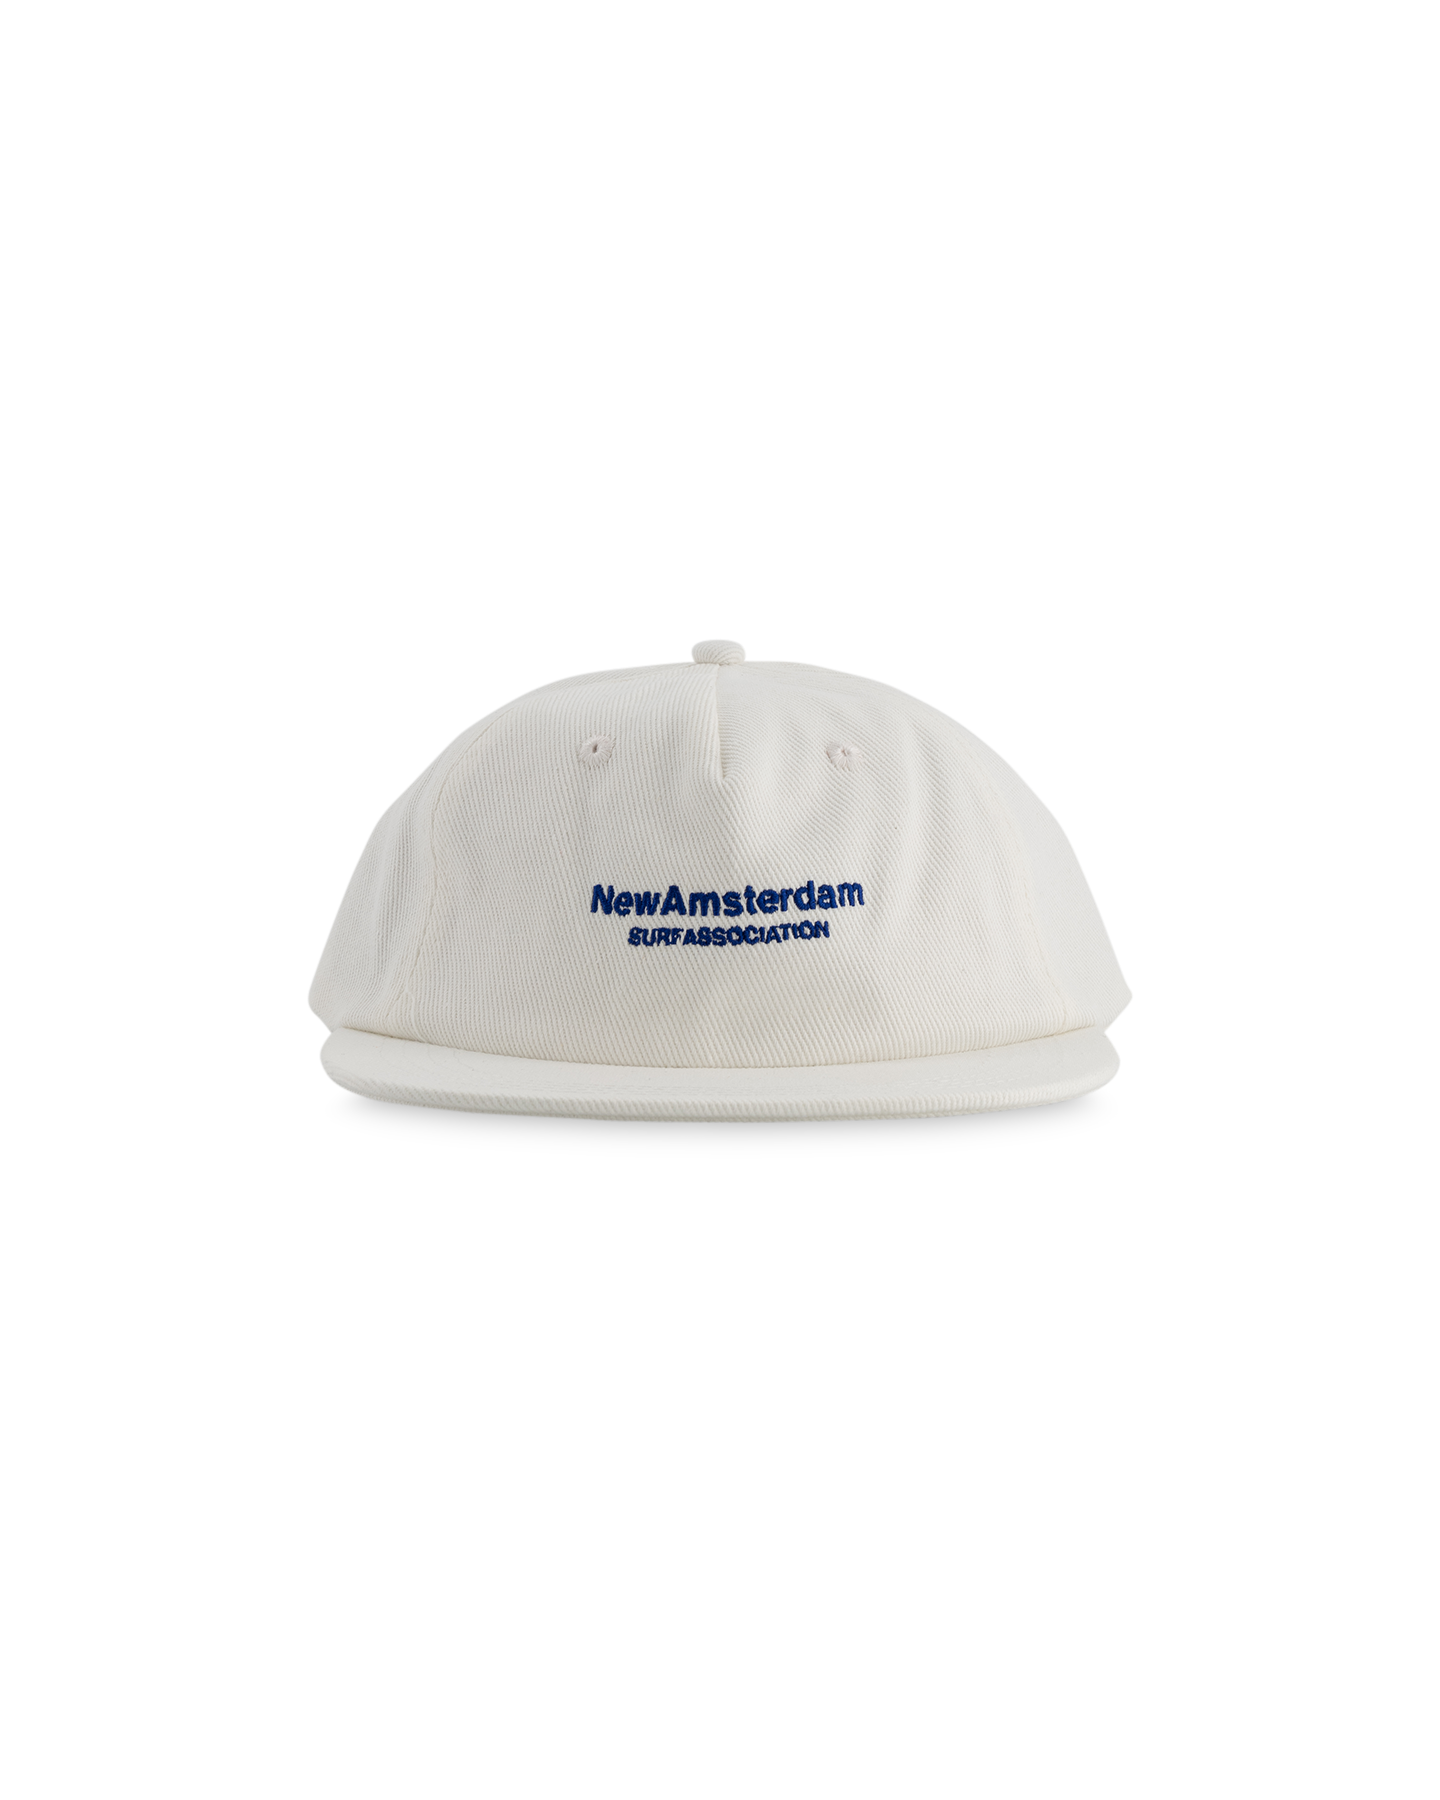 New Amsterdam Surf Association Name Cap White WIT 2